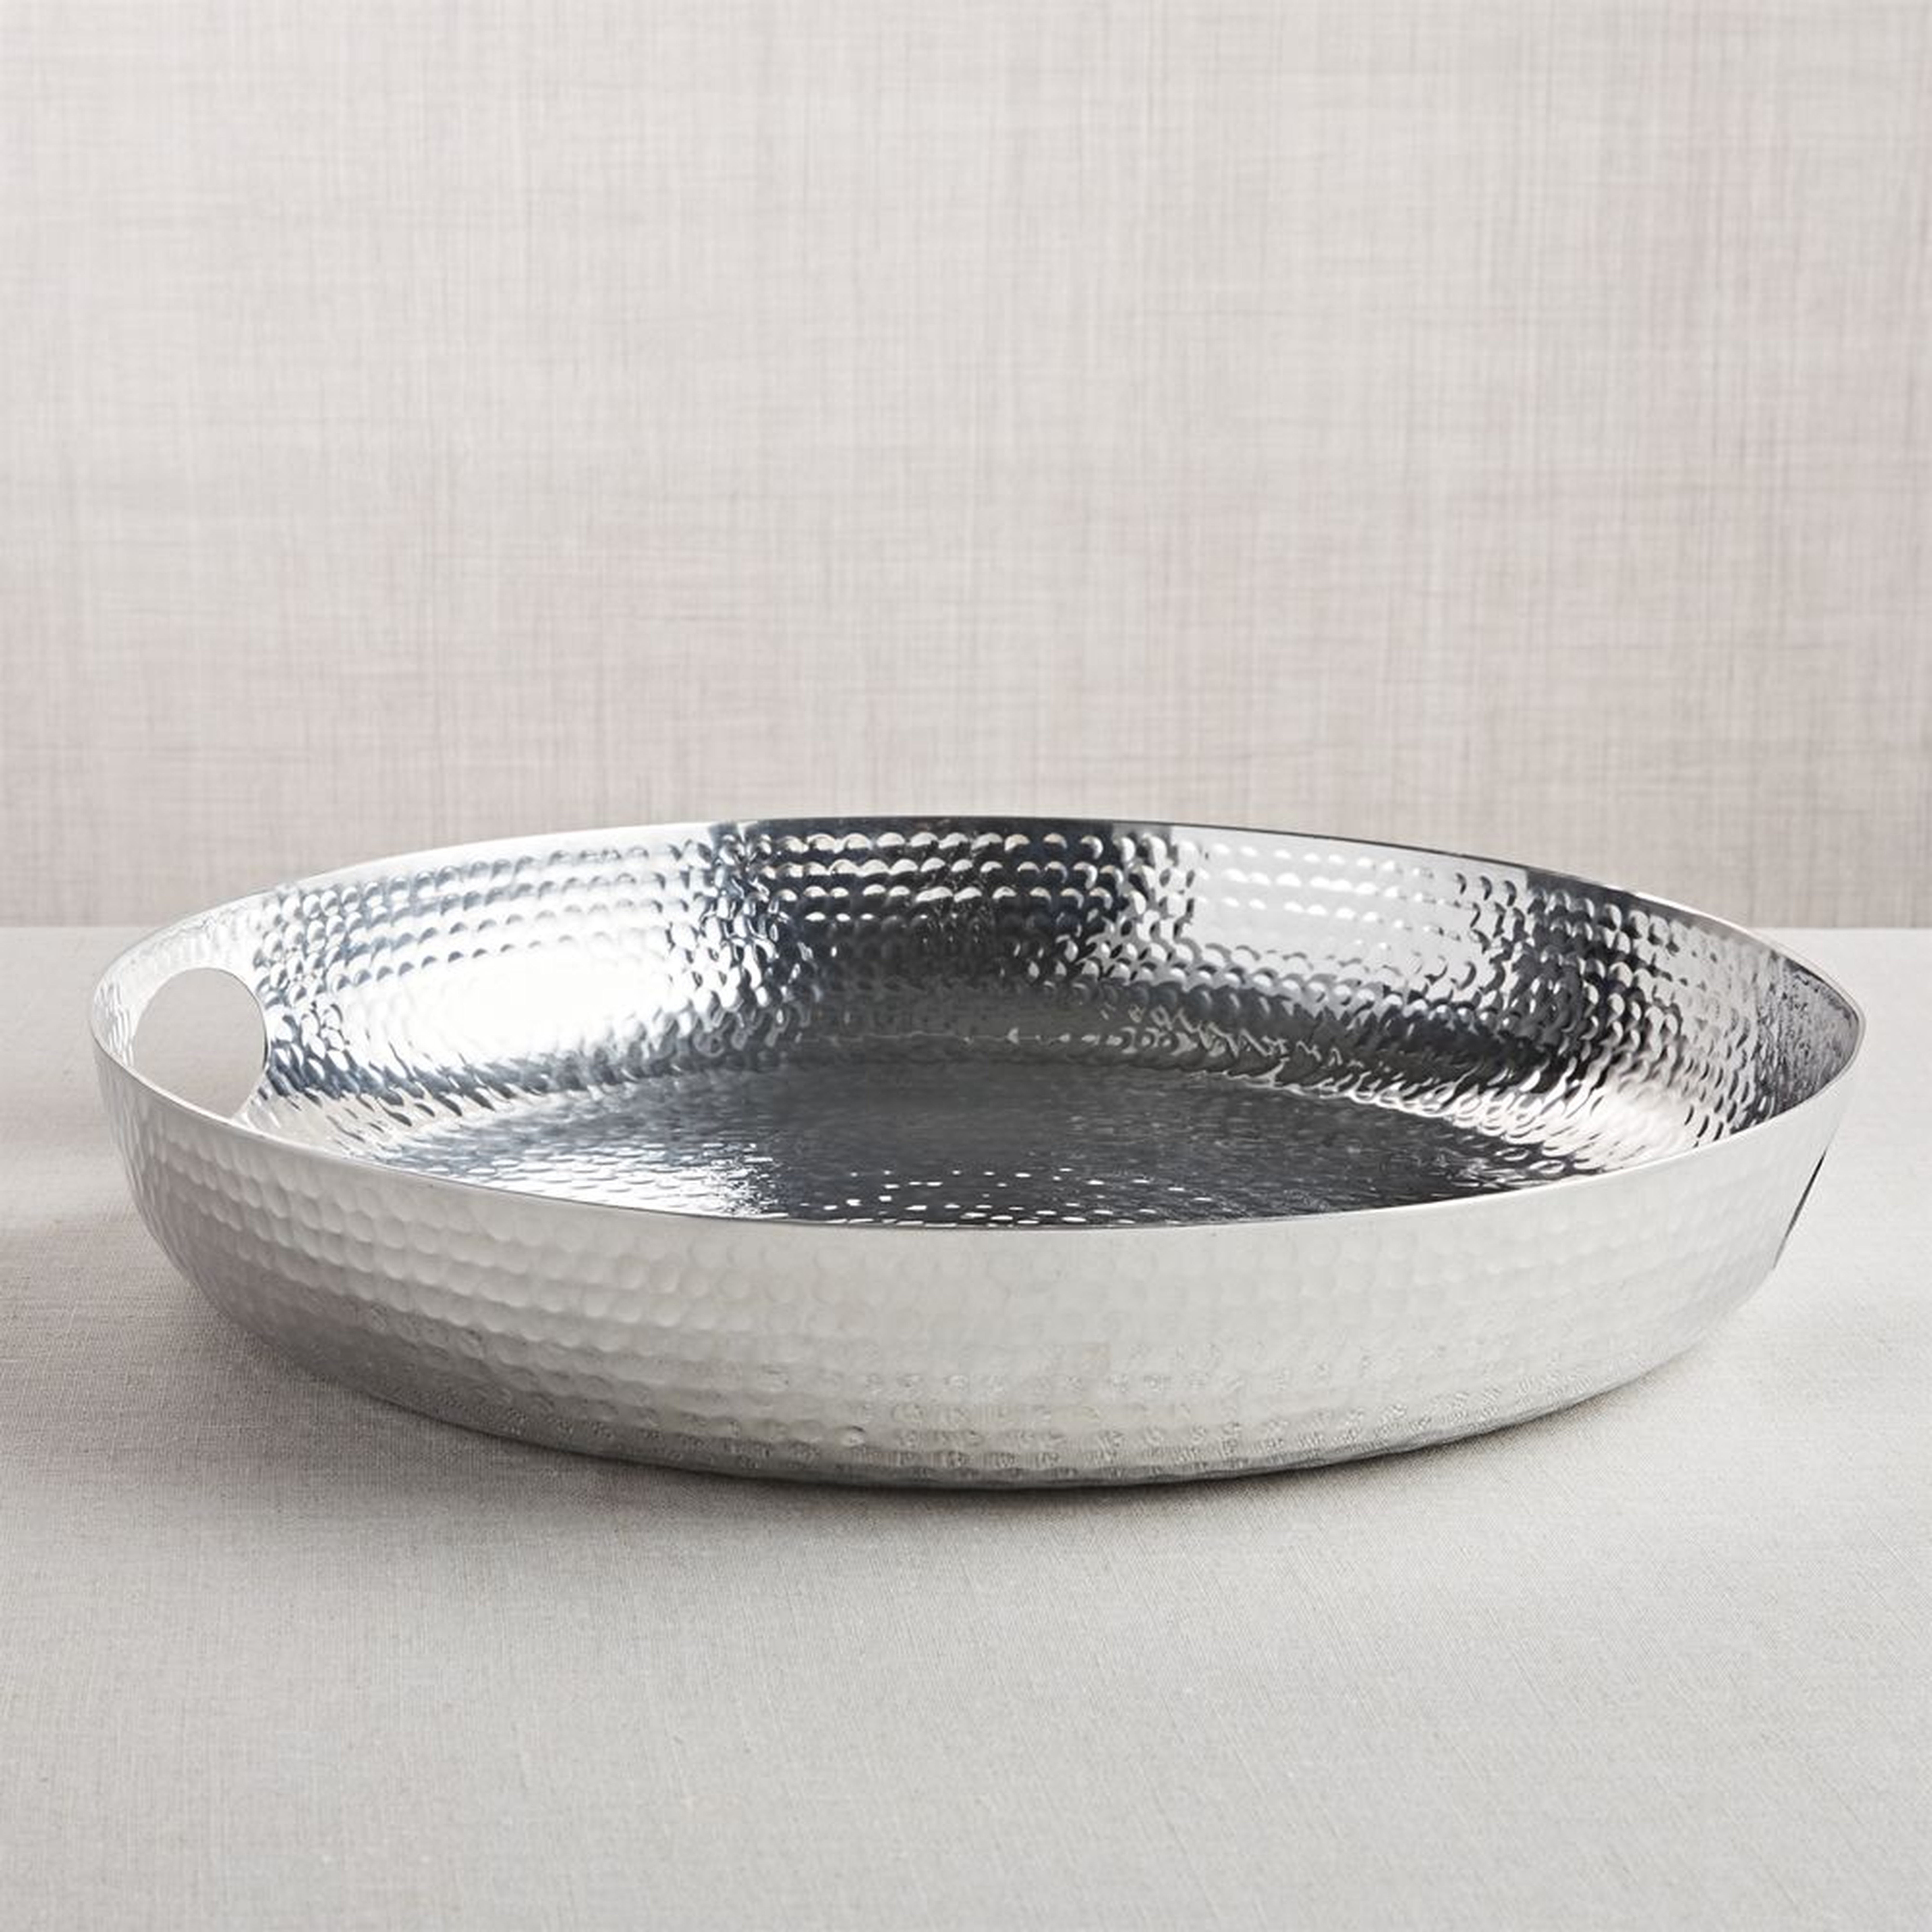 Bash Silver Tray - Crate and Barrel